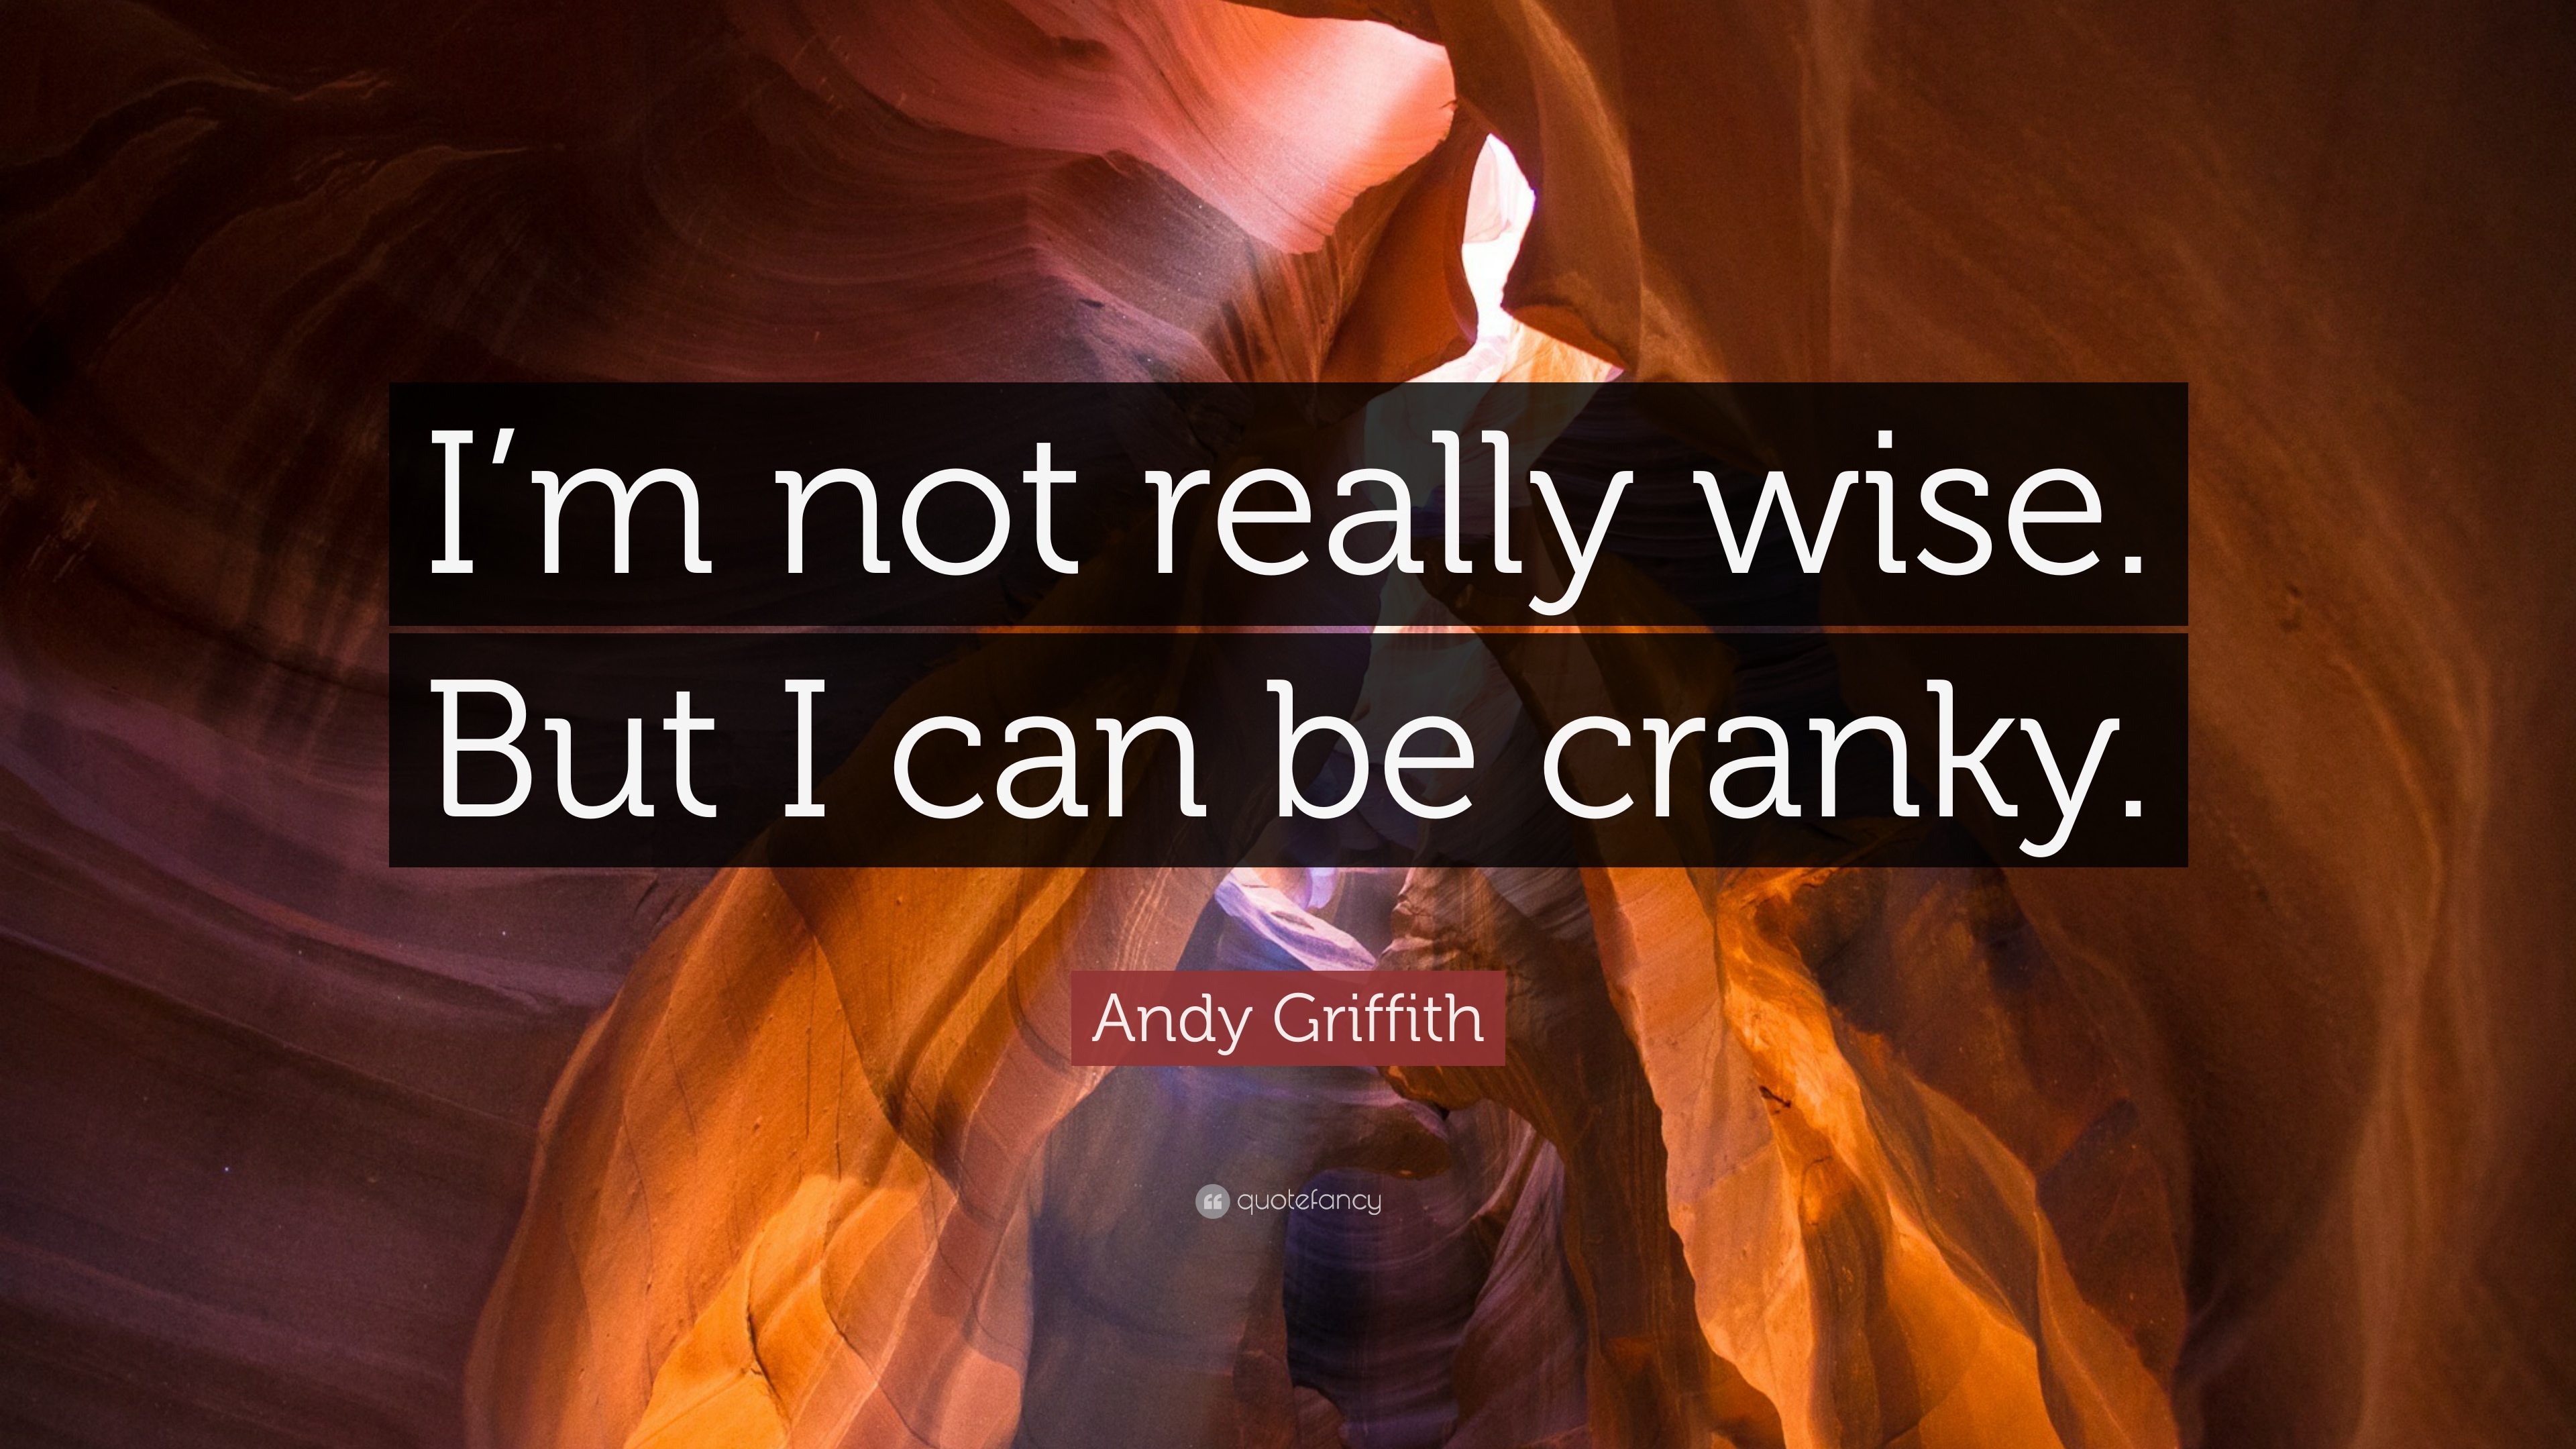 Andy griffith quote âim not really wise but i can be crankyâ